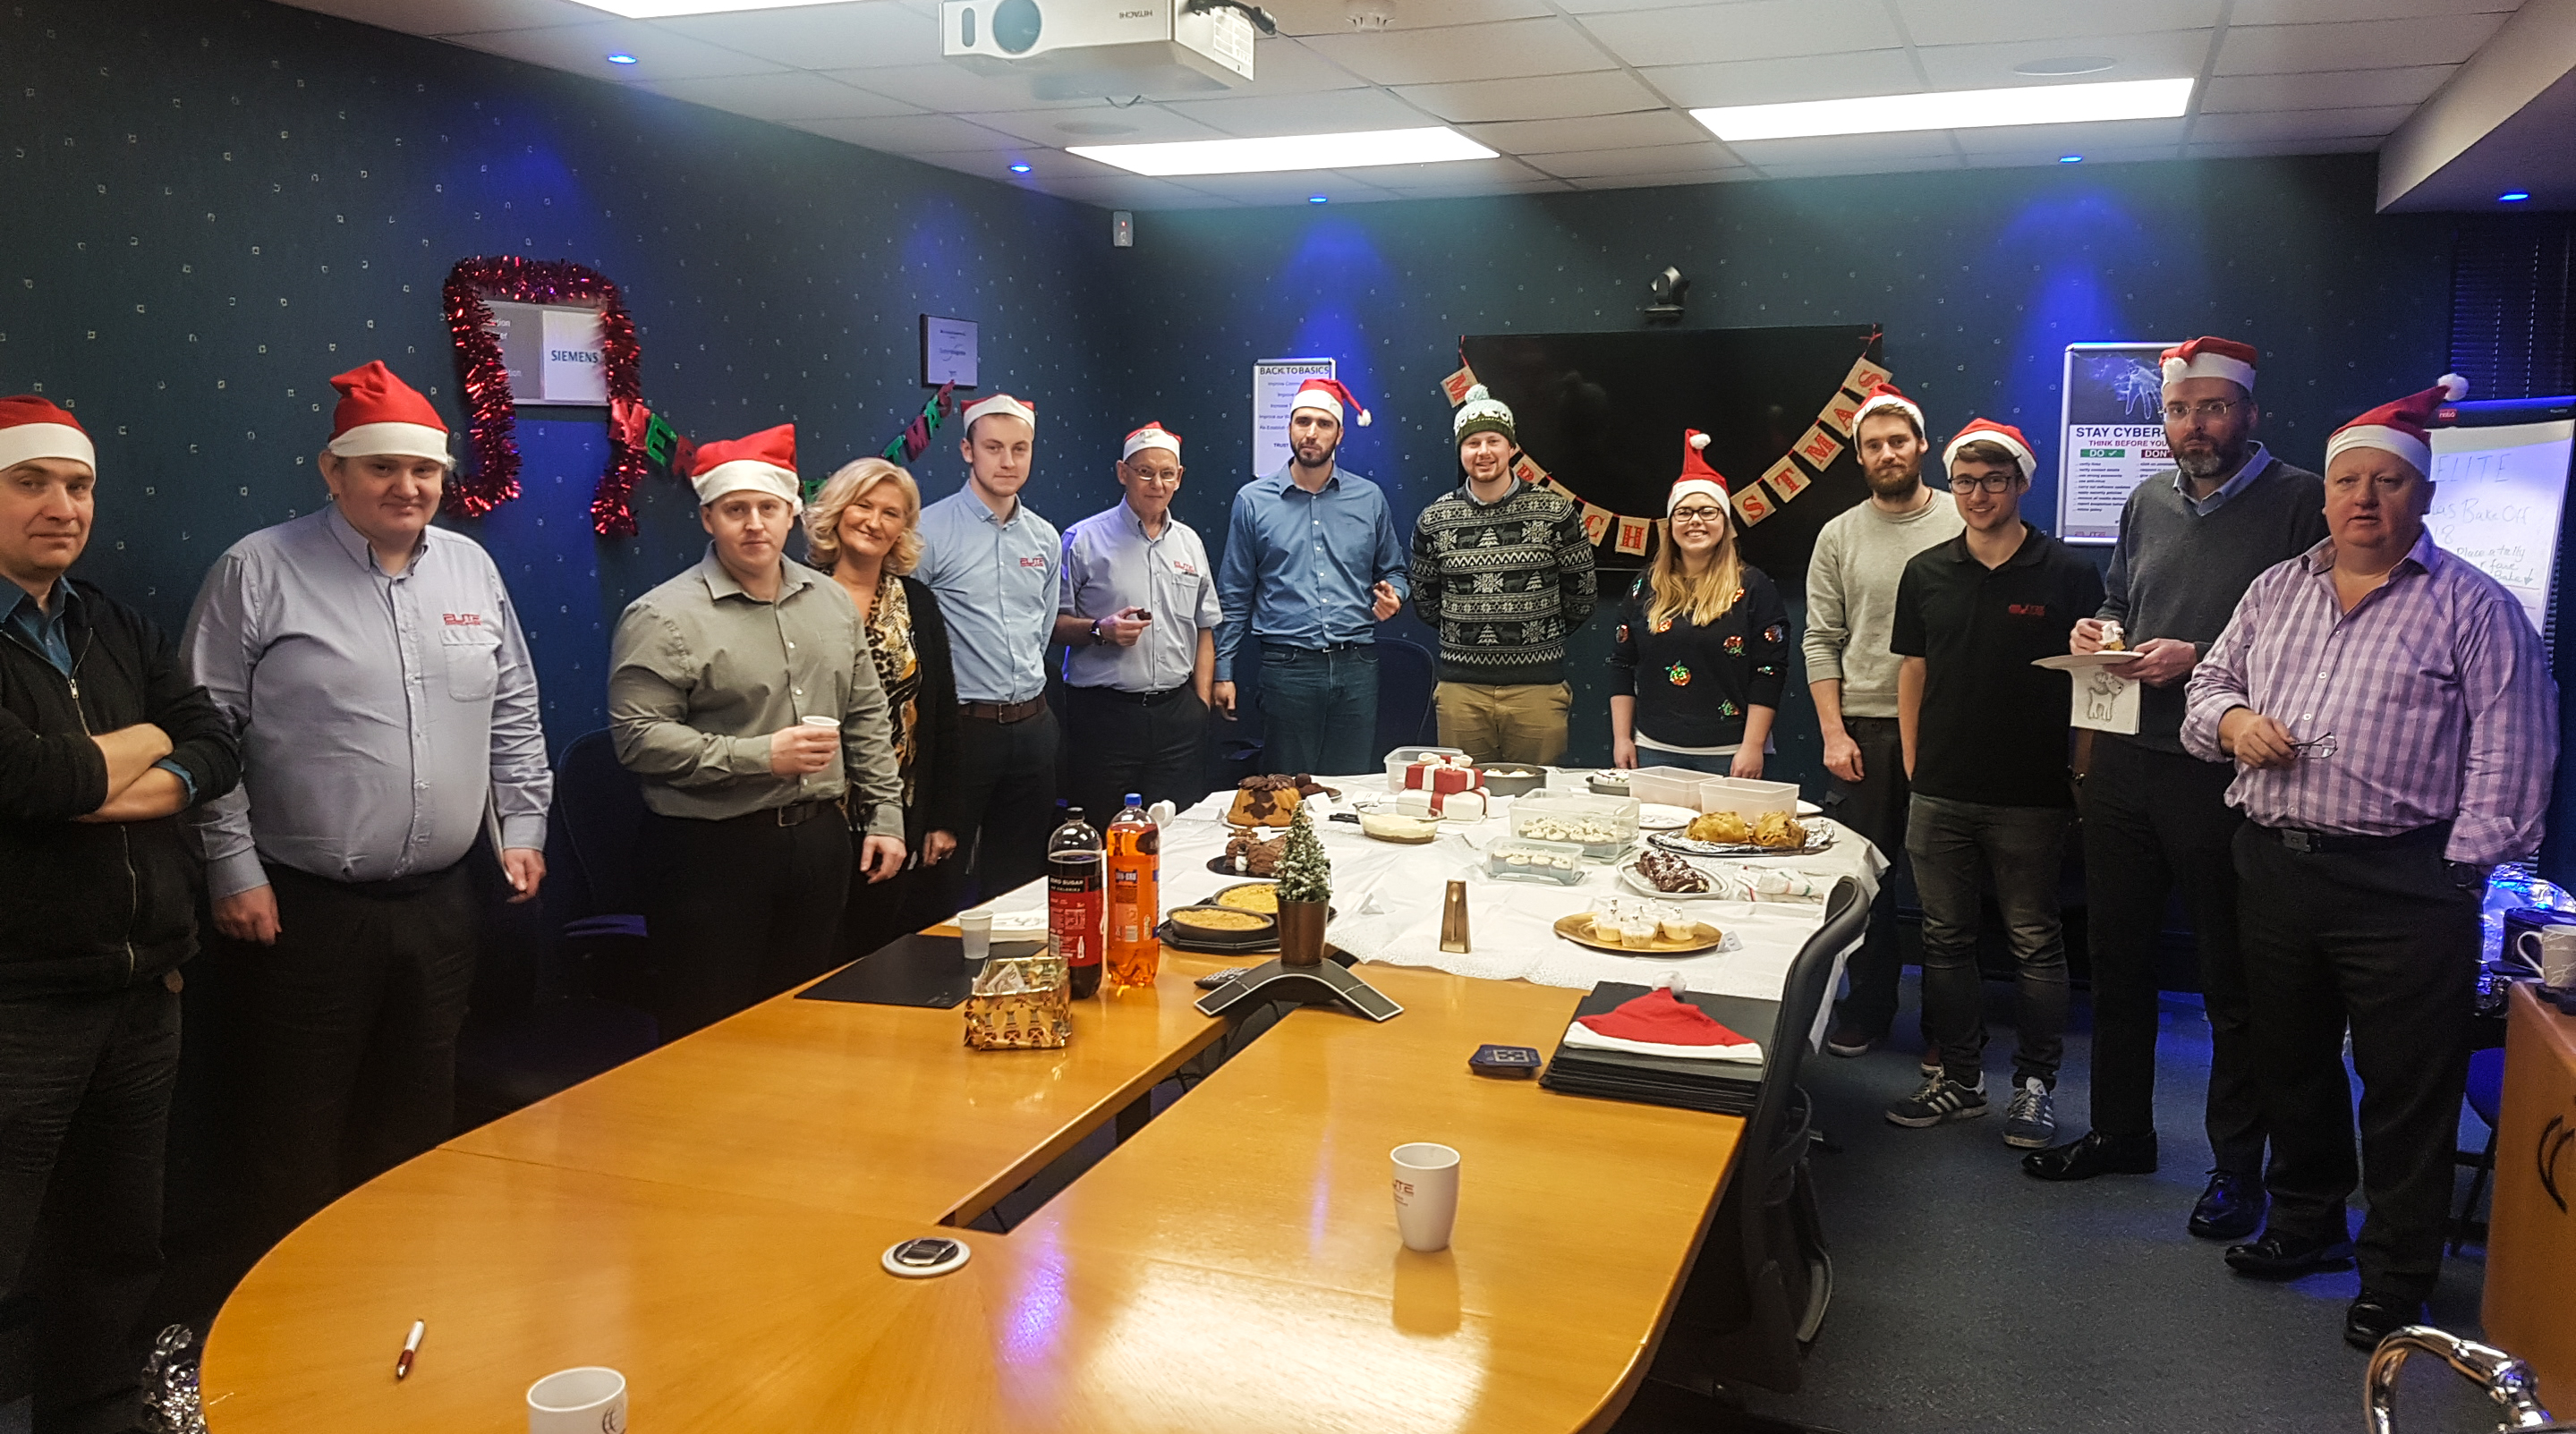 Colleagues from AGSL and Elite Control Systems compete in Christmas Bake Off